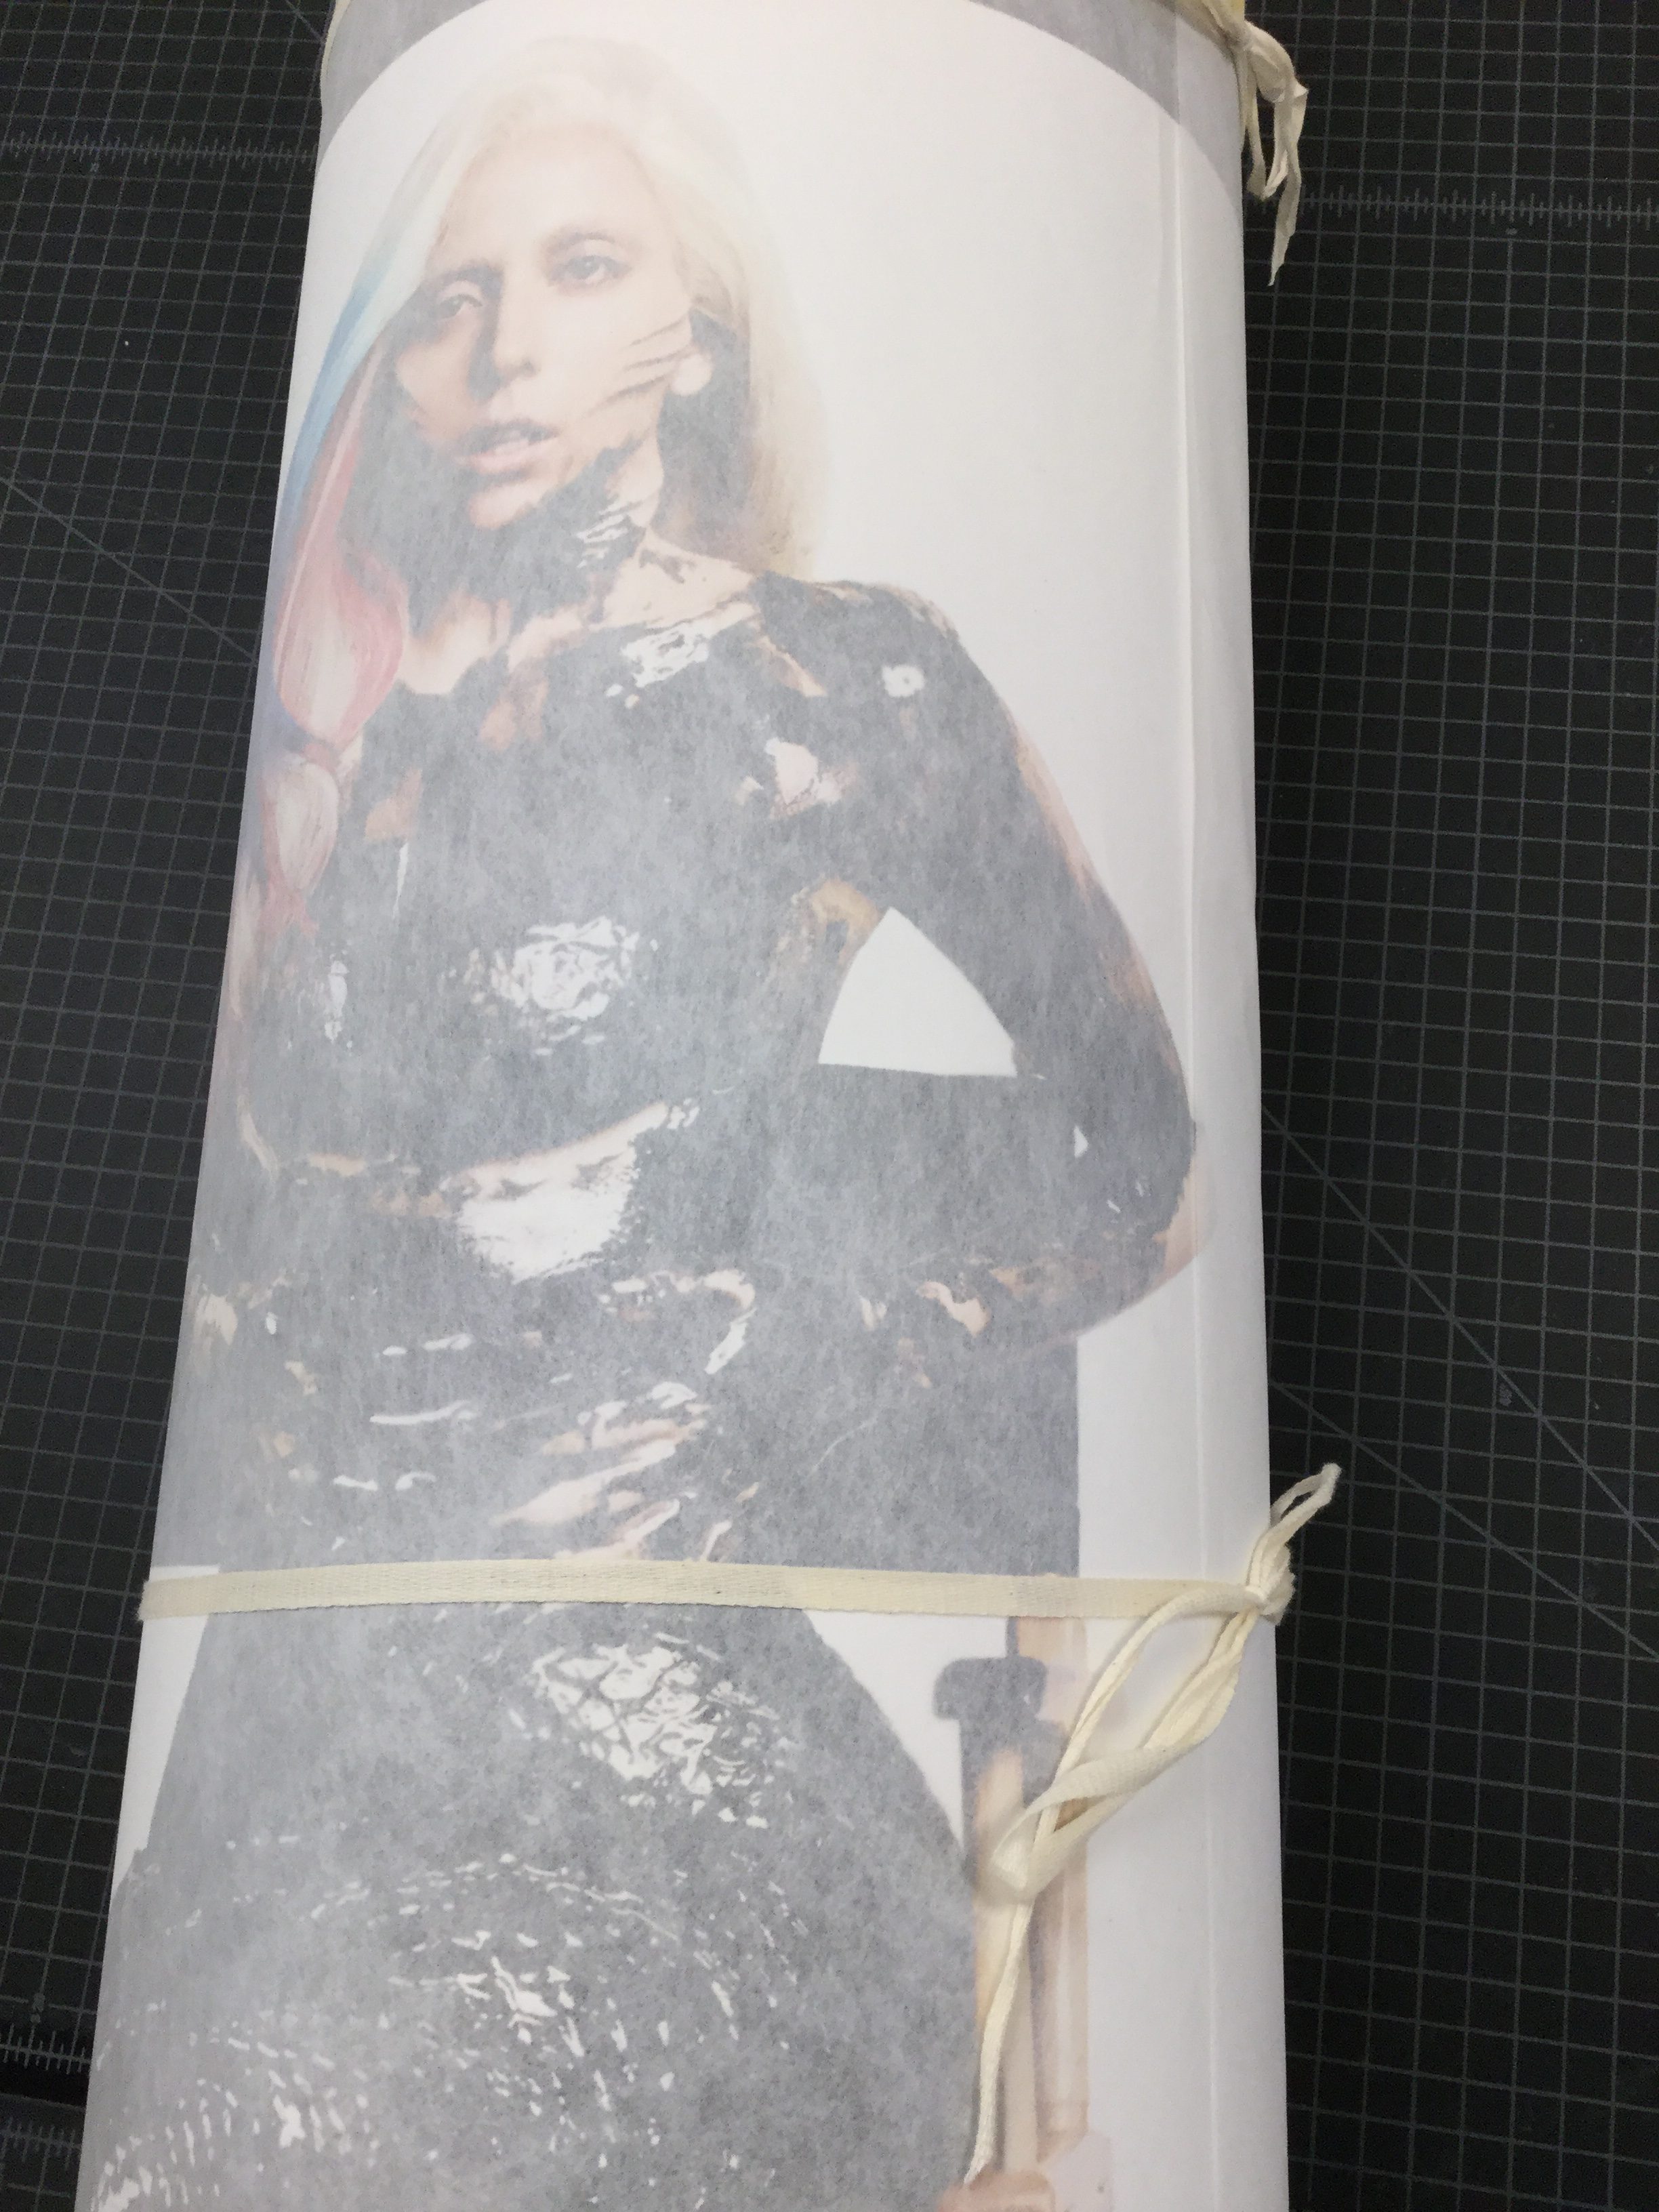 Cover image of the journal Visionaire with a photo of Lady Gaga